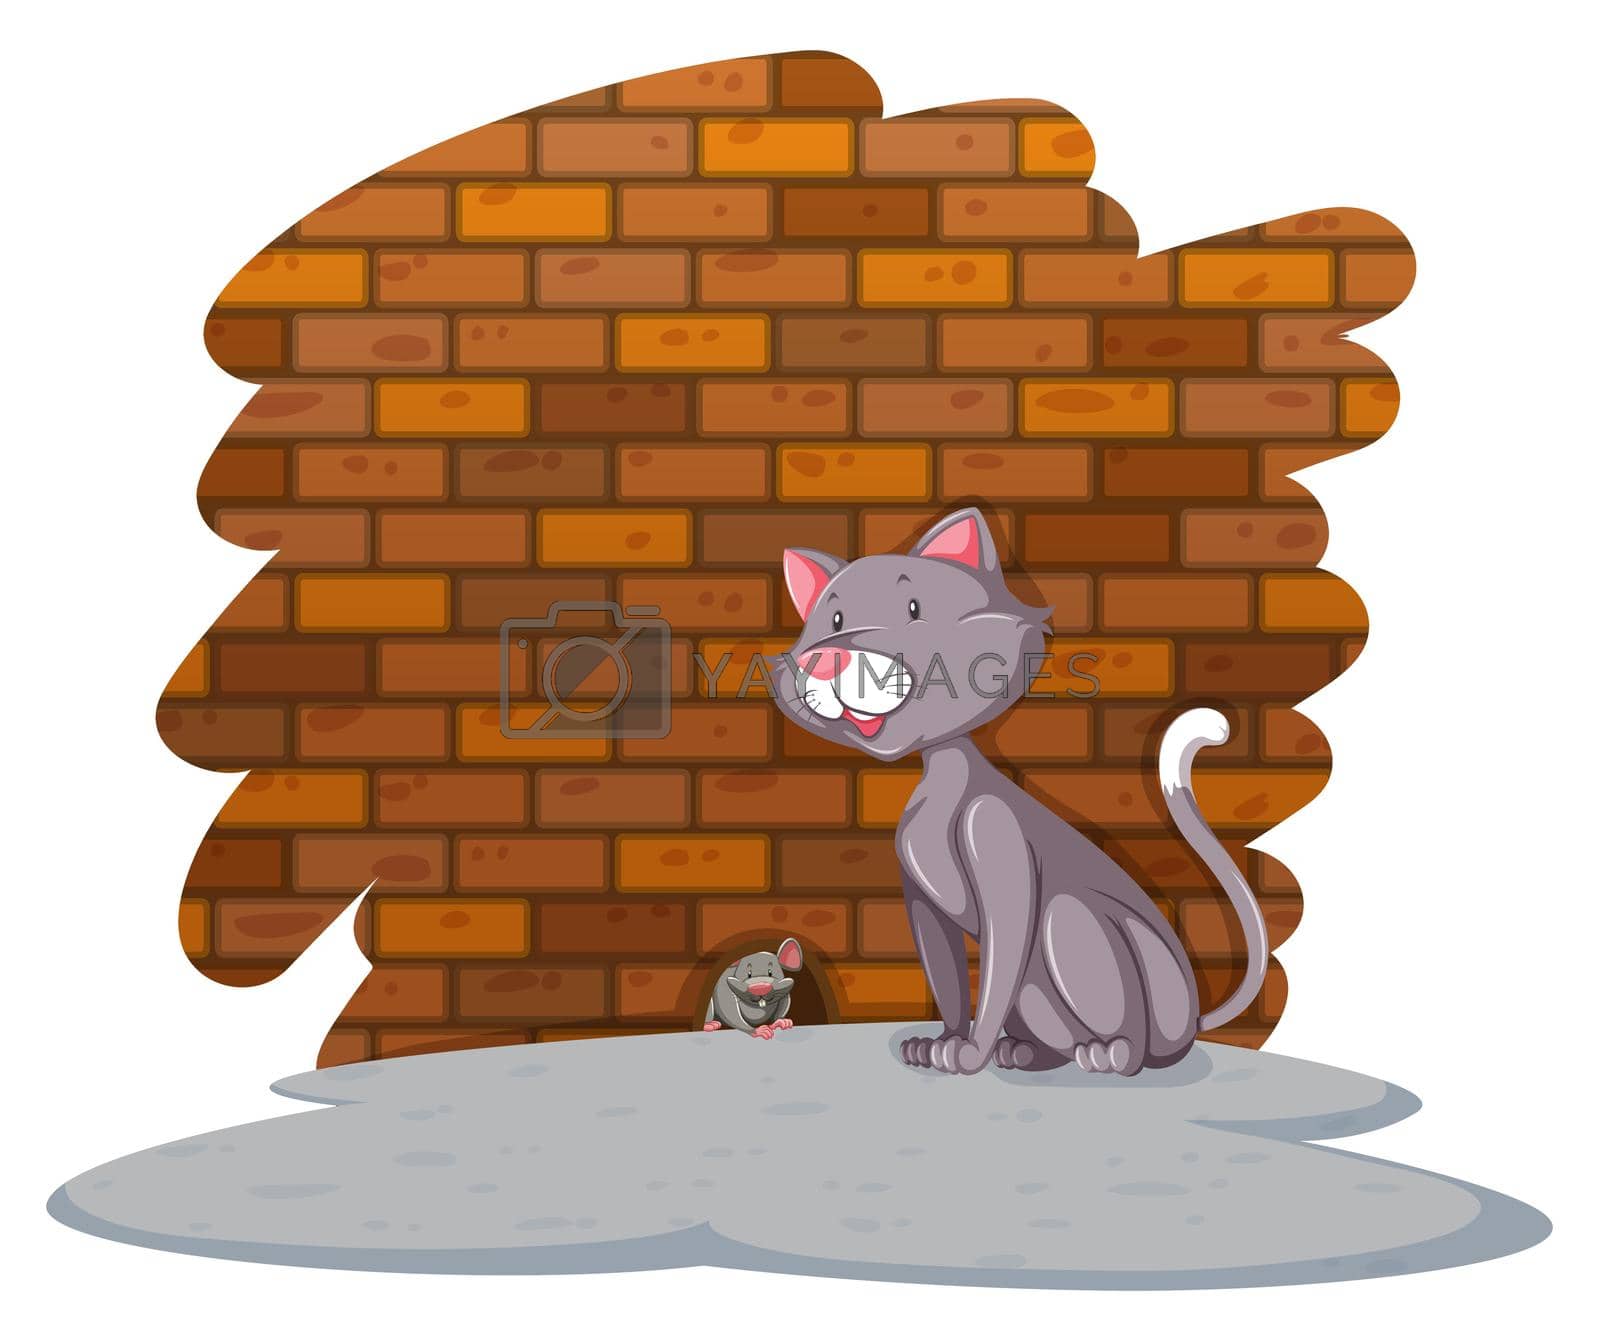 Royalty free image of Cat waiting for the rat by iimages